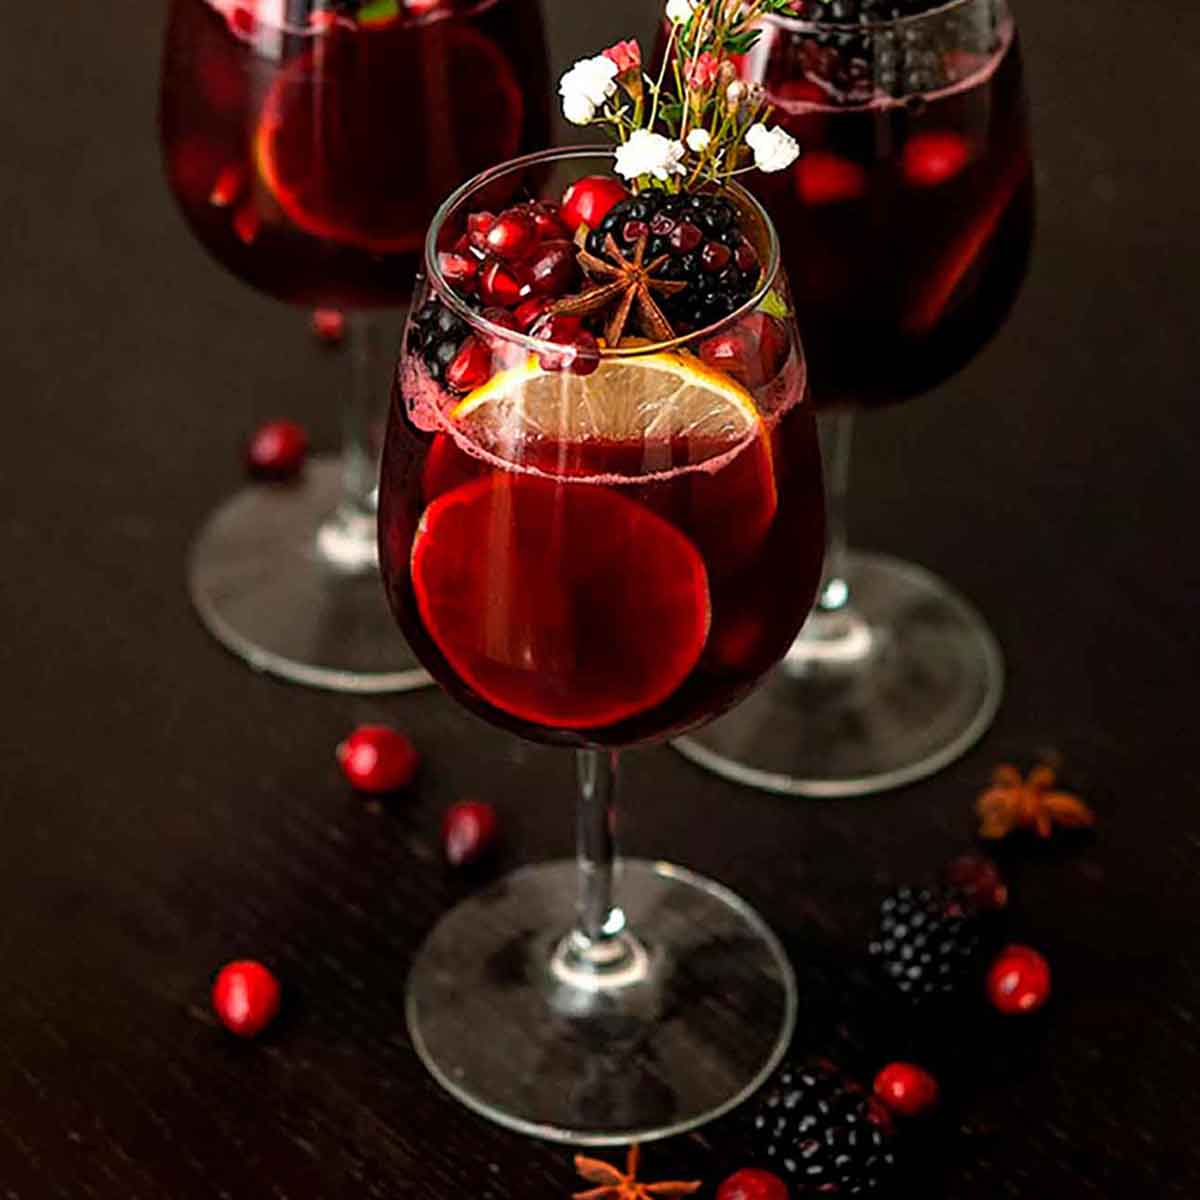 A glass of sangria garnished with fruits, flowers, herbs and star anise, with a few scattered cranberries and blackberries.